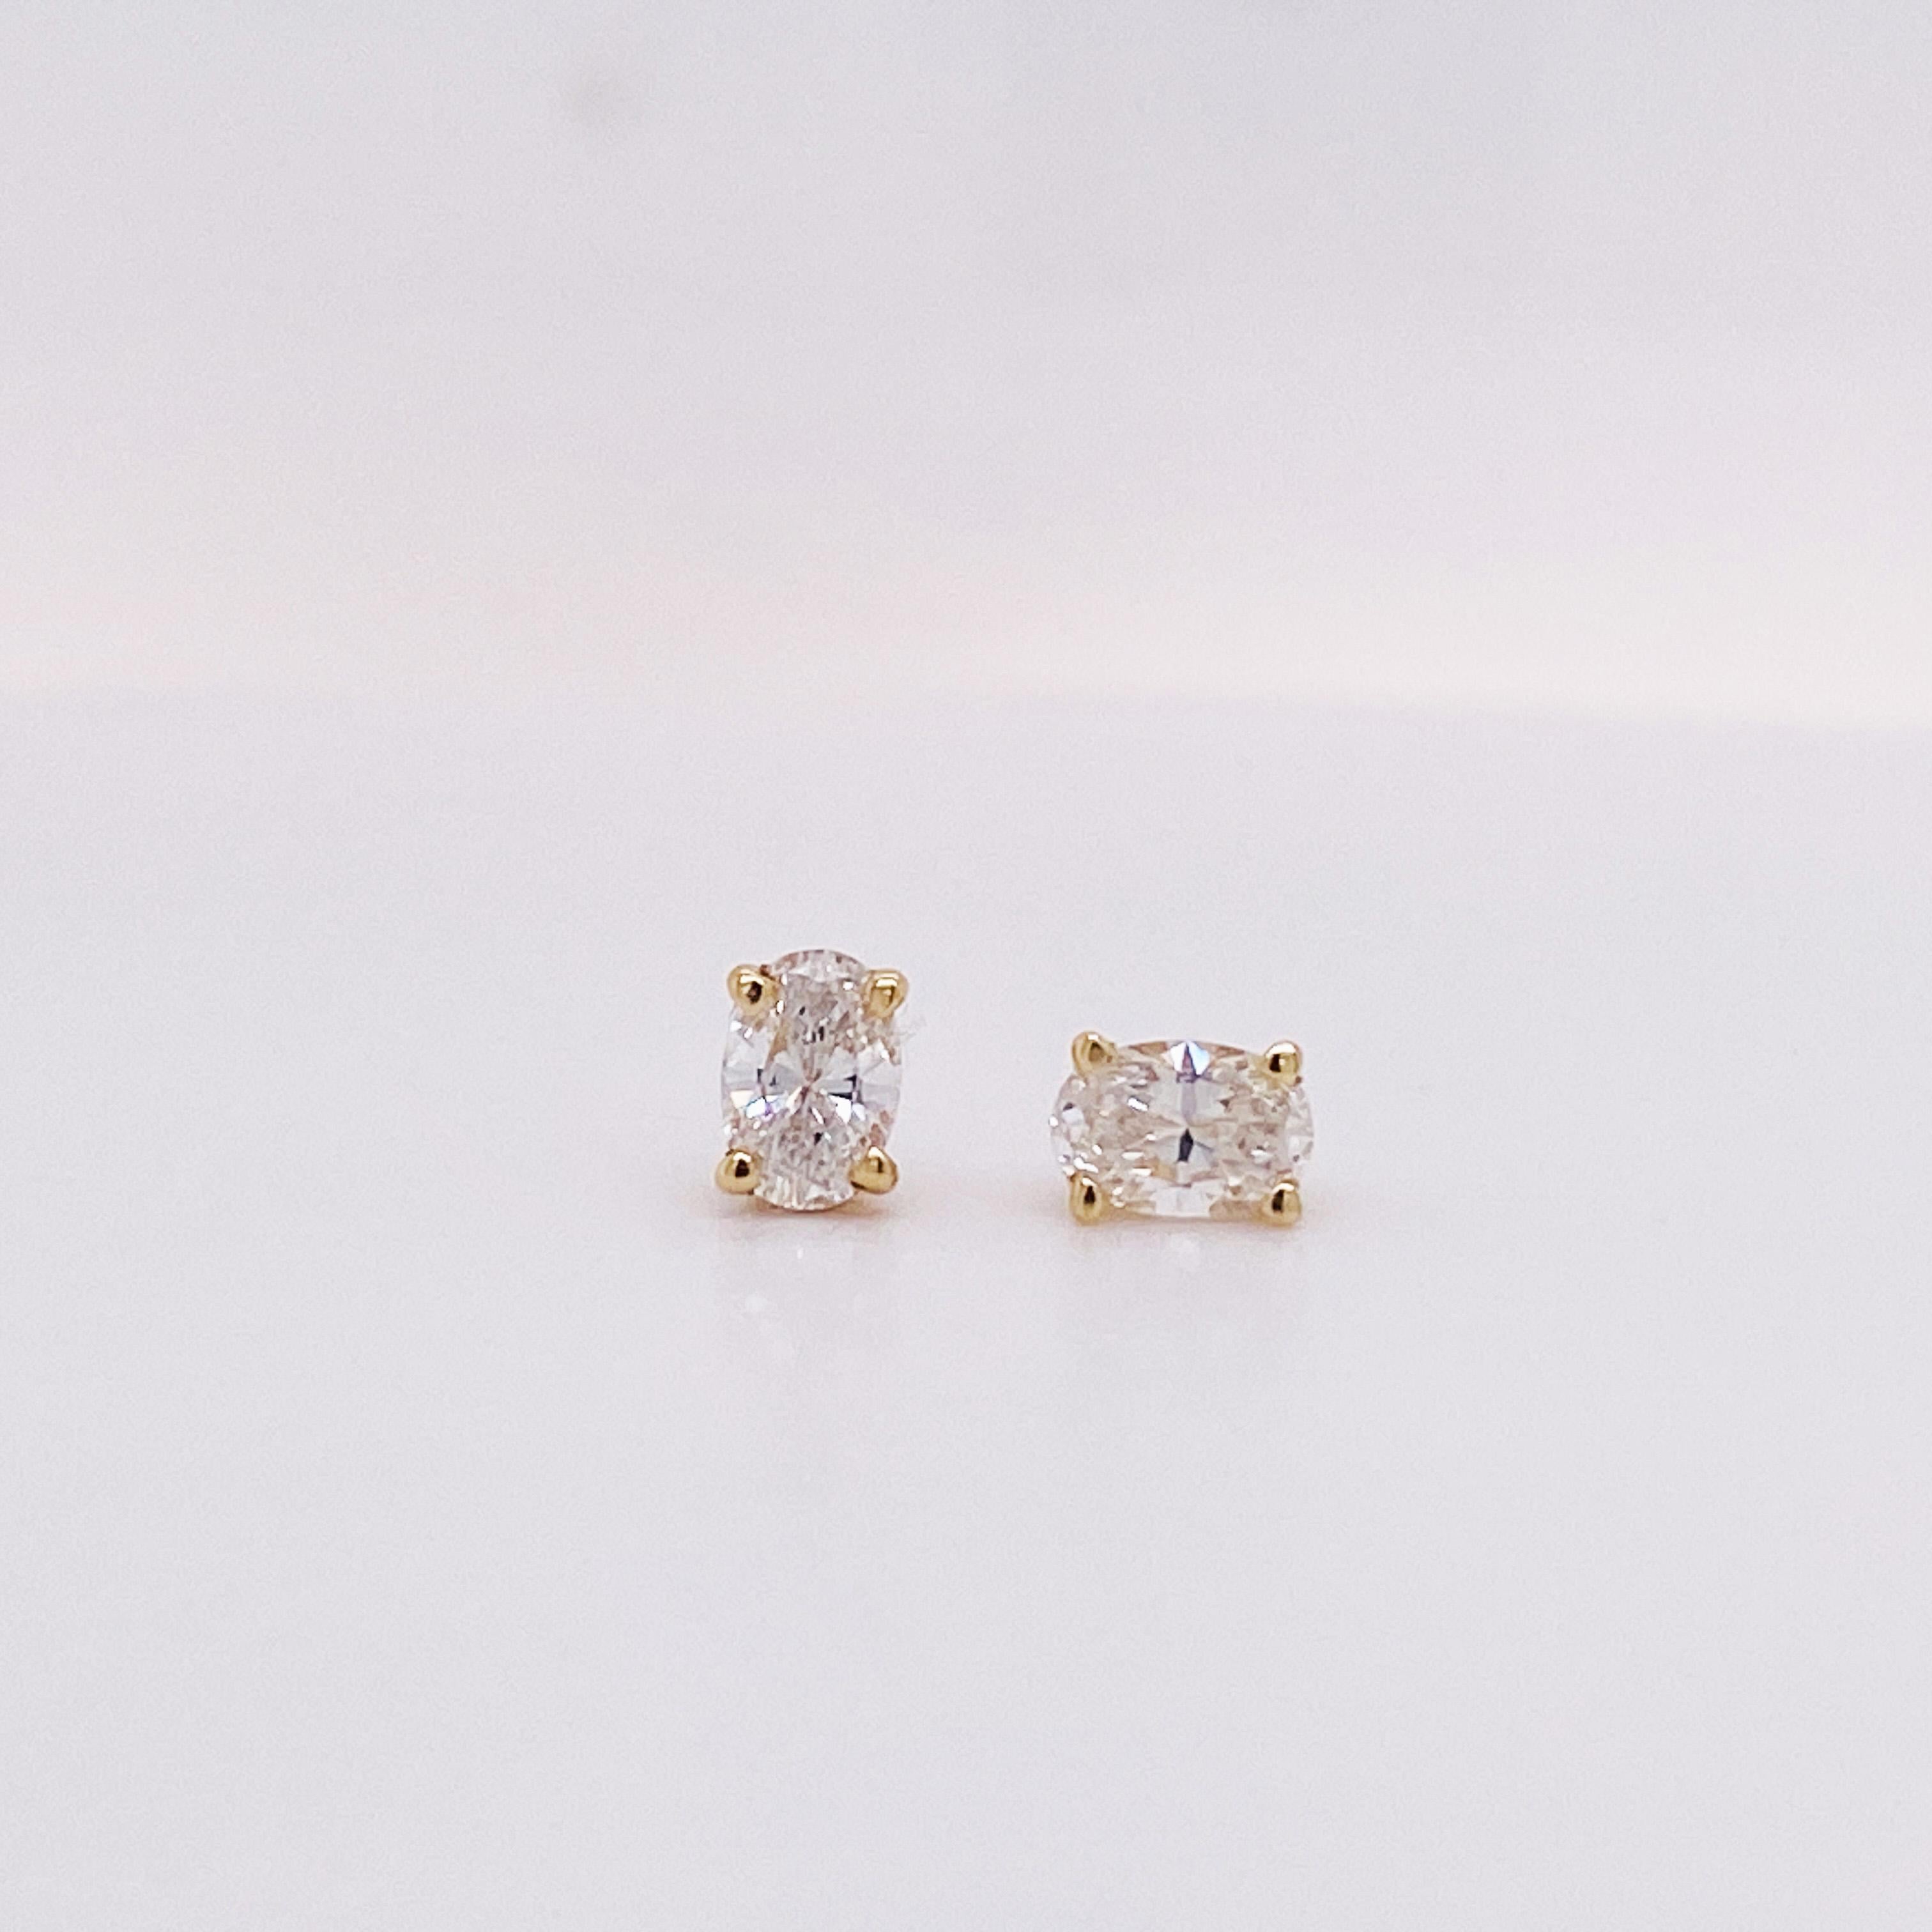 Oval Cut Oval Diamonds .50 Carats Stud Pair in 14K Yellow Gold 1/2 Carat Total Lv For Sale